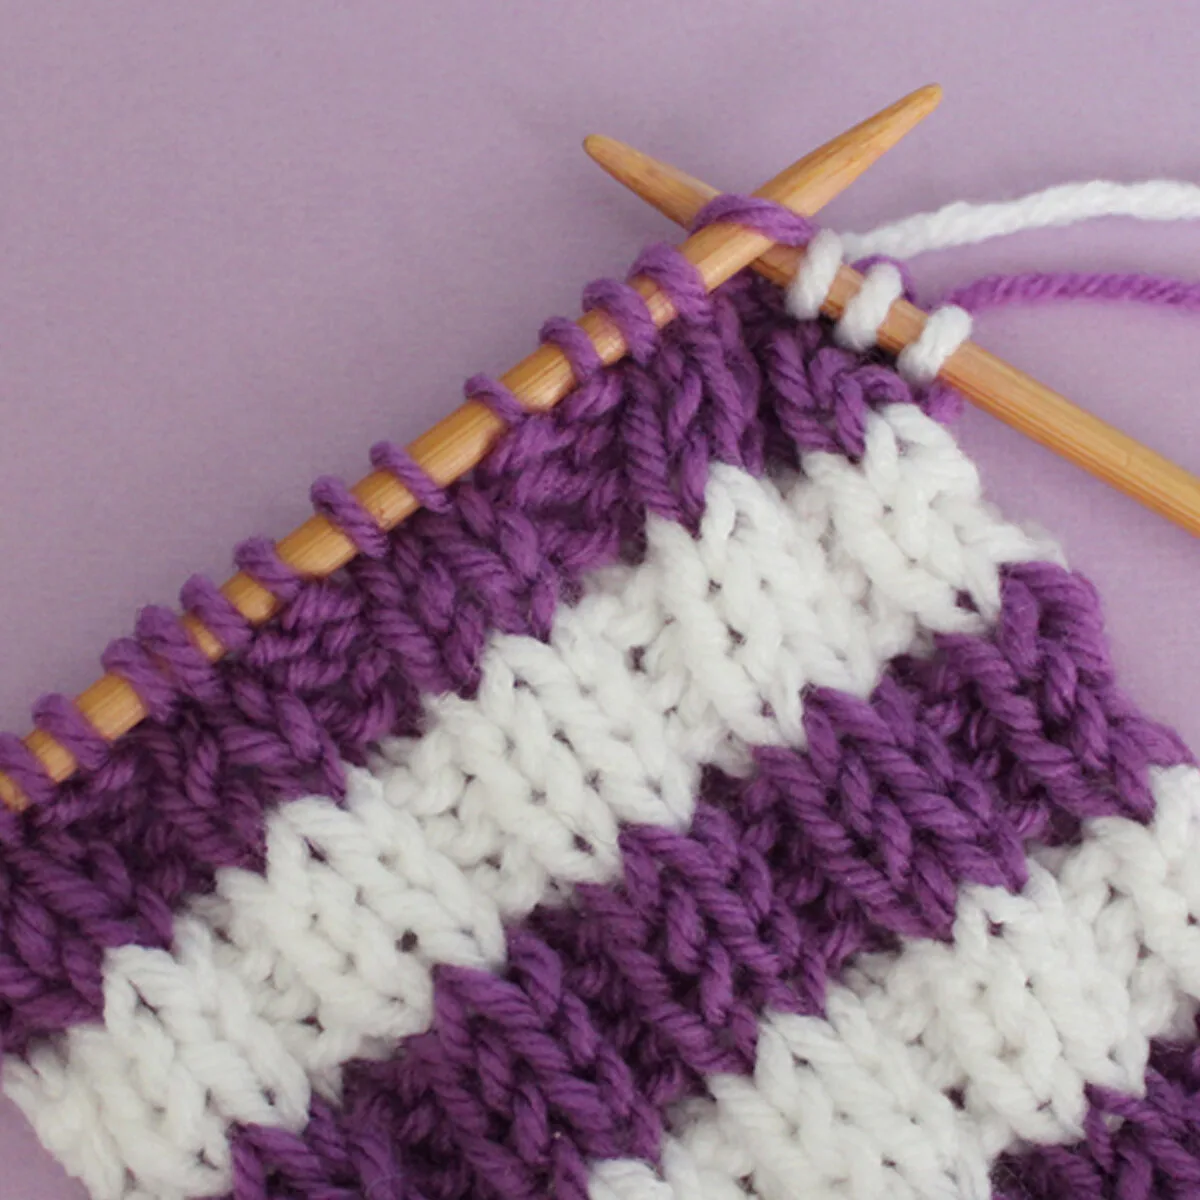 Knitted Stripes in rib stitch pattern with purple and white yarn colors on knitting needles.